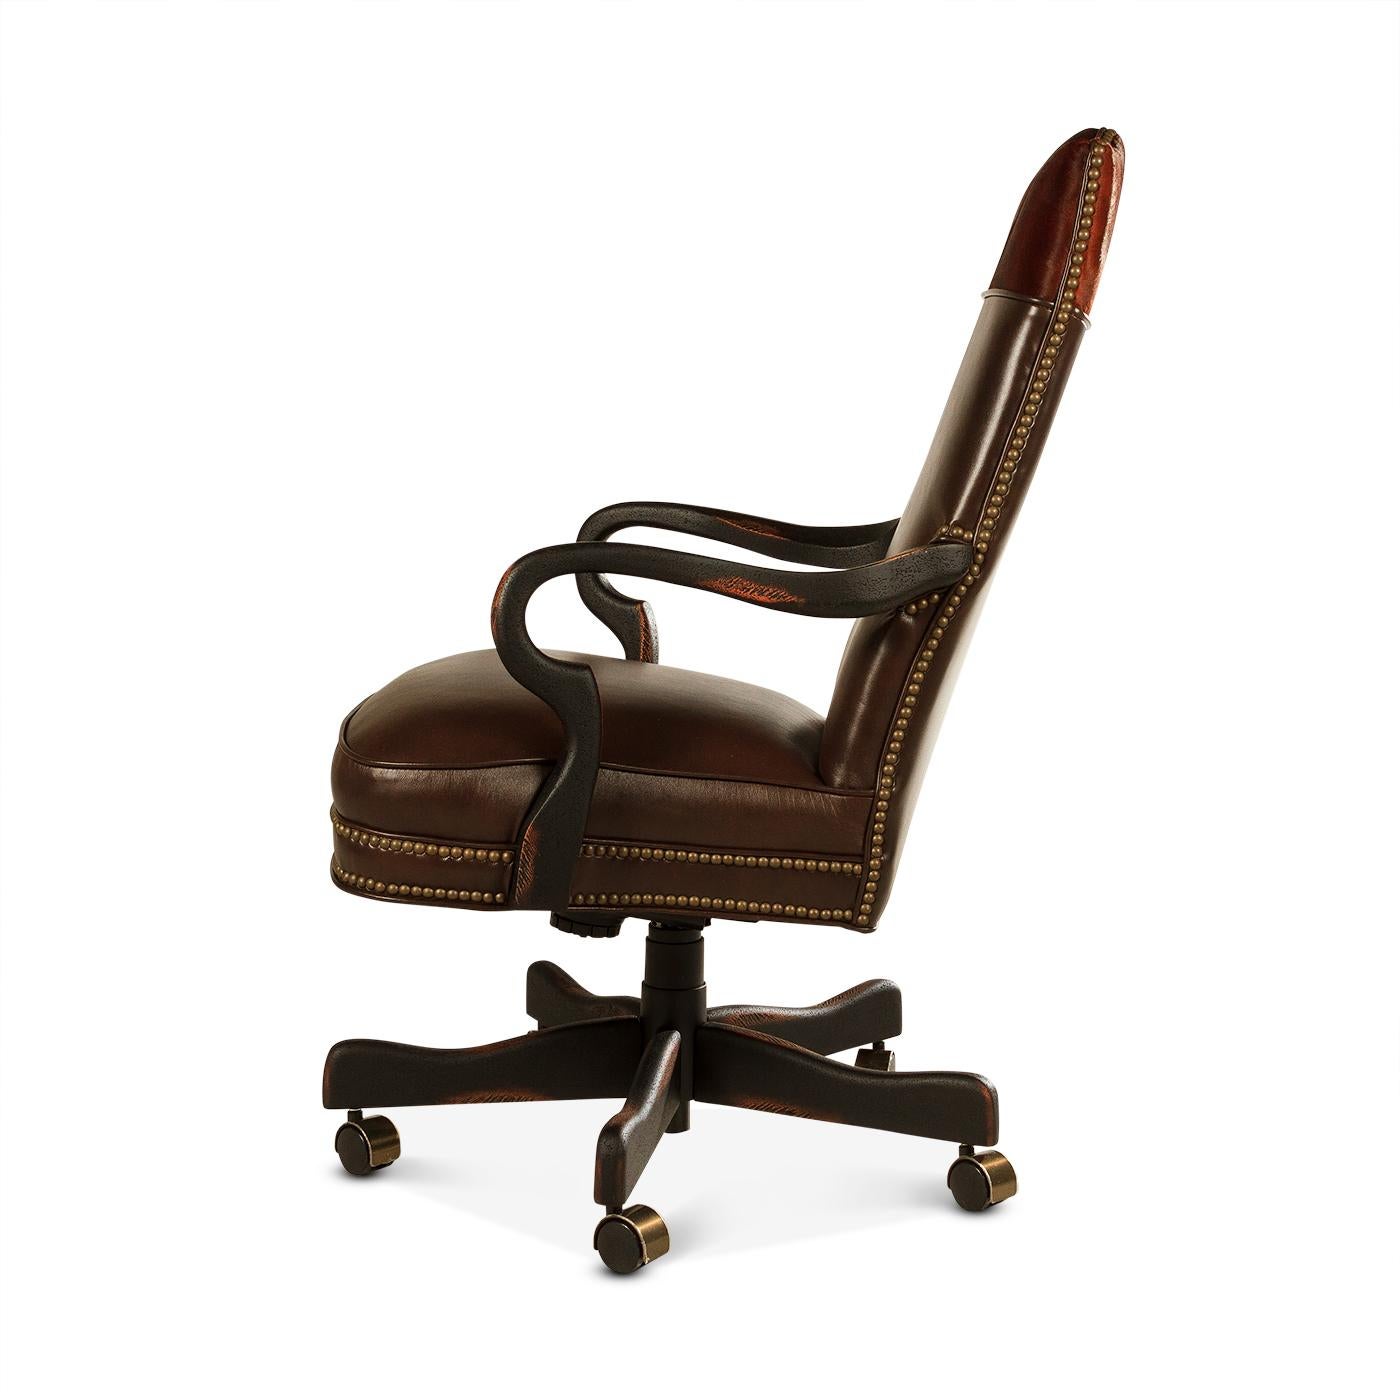 A fully customizable leather office chair is made with top grain high-quality leathers with an exotic hair on hyde and chocolate brown. The high back office chair has natural brass nailhead details and the shepherd's crook arm is finished in our